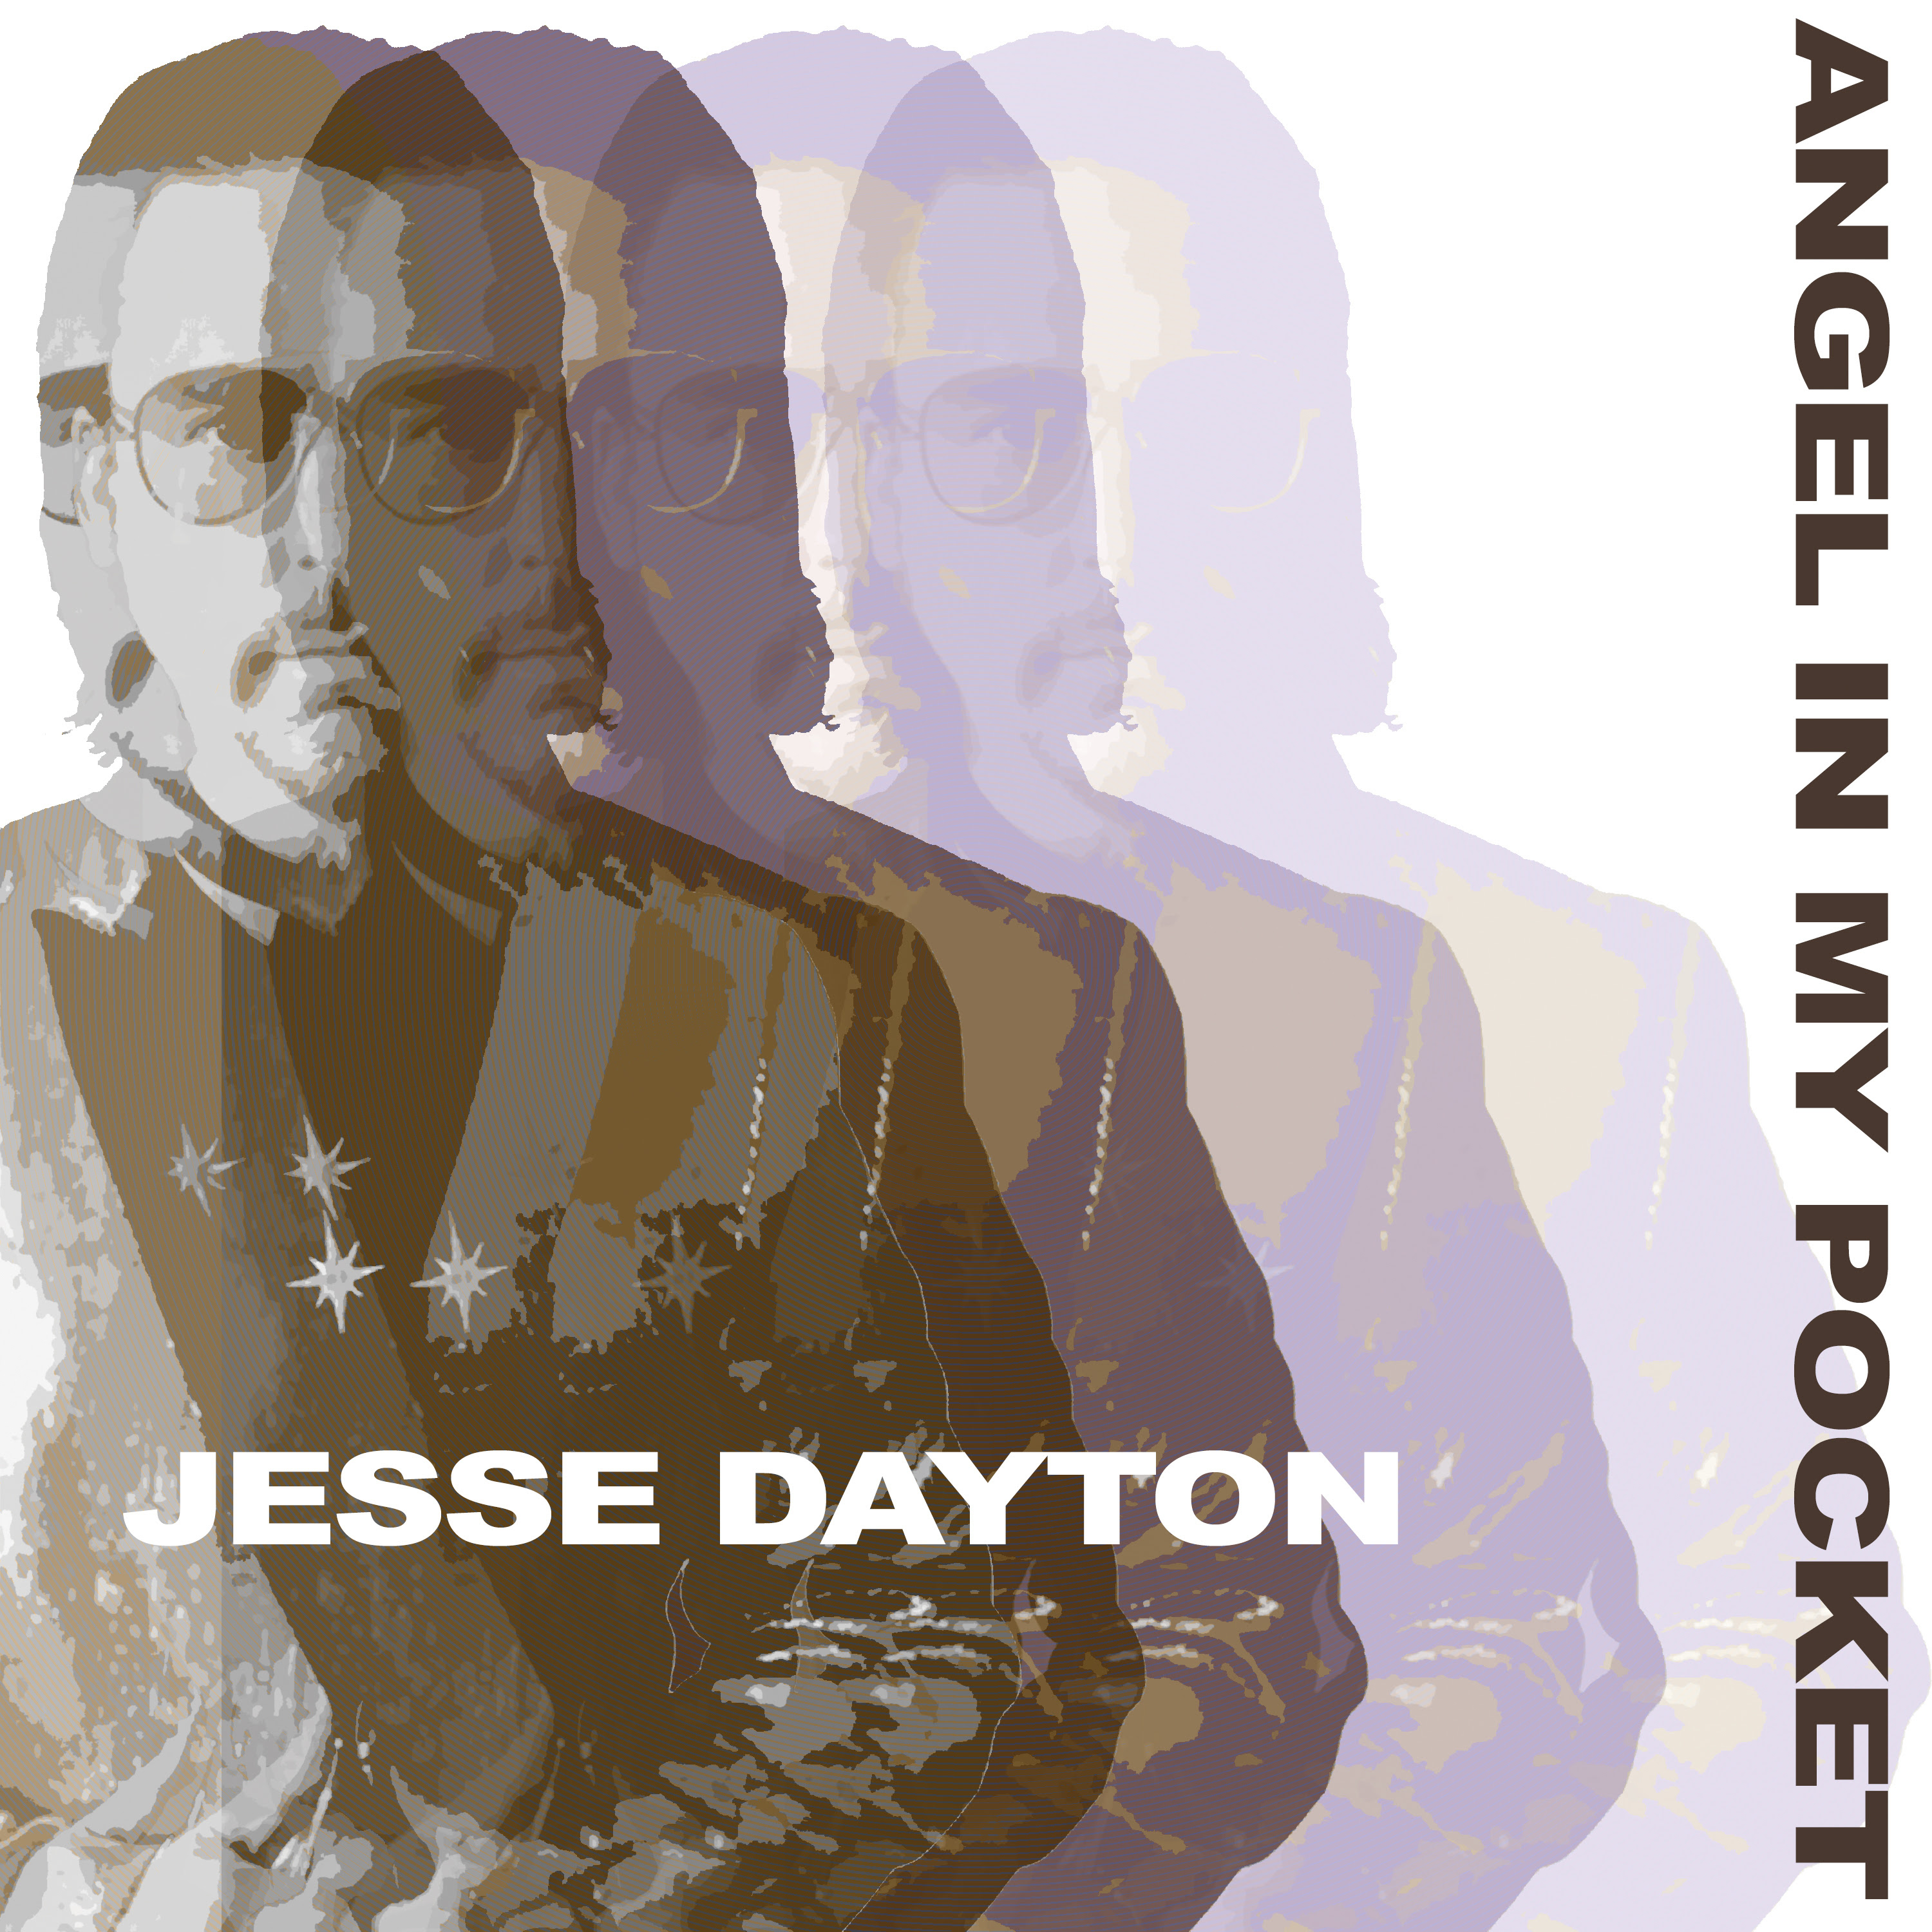 JESSE DAYTON drops new single "Angel in My Pocket" - from highly anticipated Shooter Jennings-produced Album